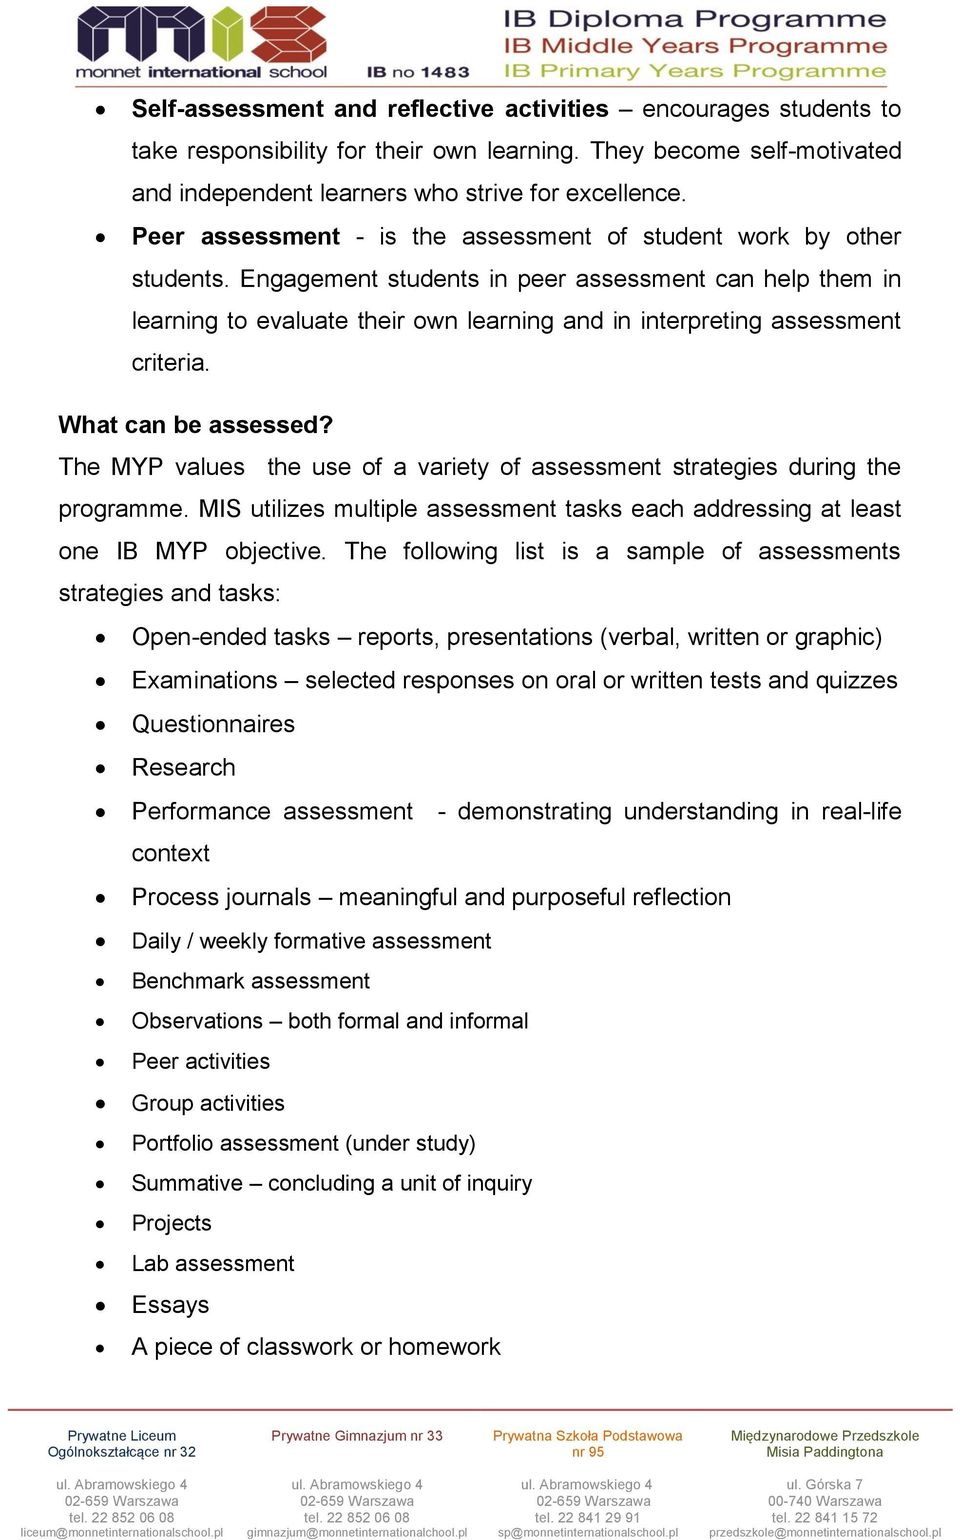 Engagement students in peer assessment can help them in learning to evaluate their own learning and in interpreting assessment criteria. What can be assessed?